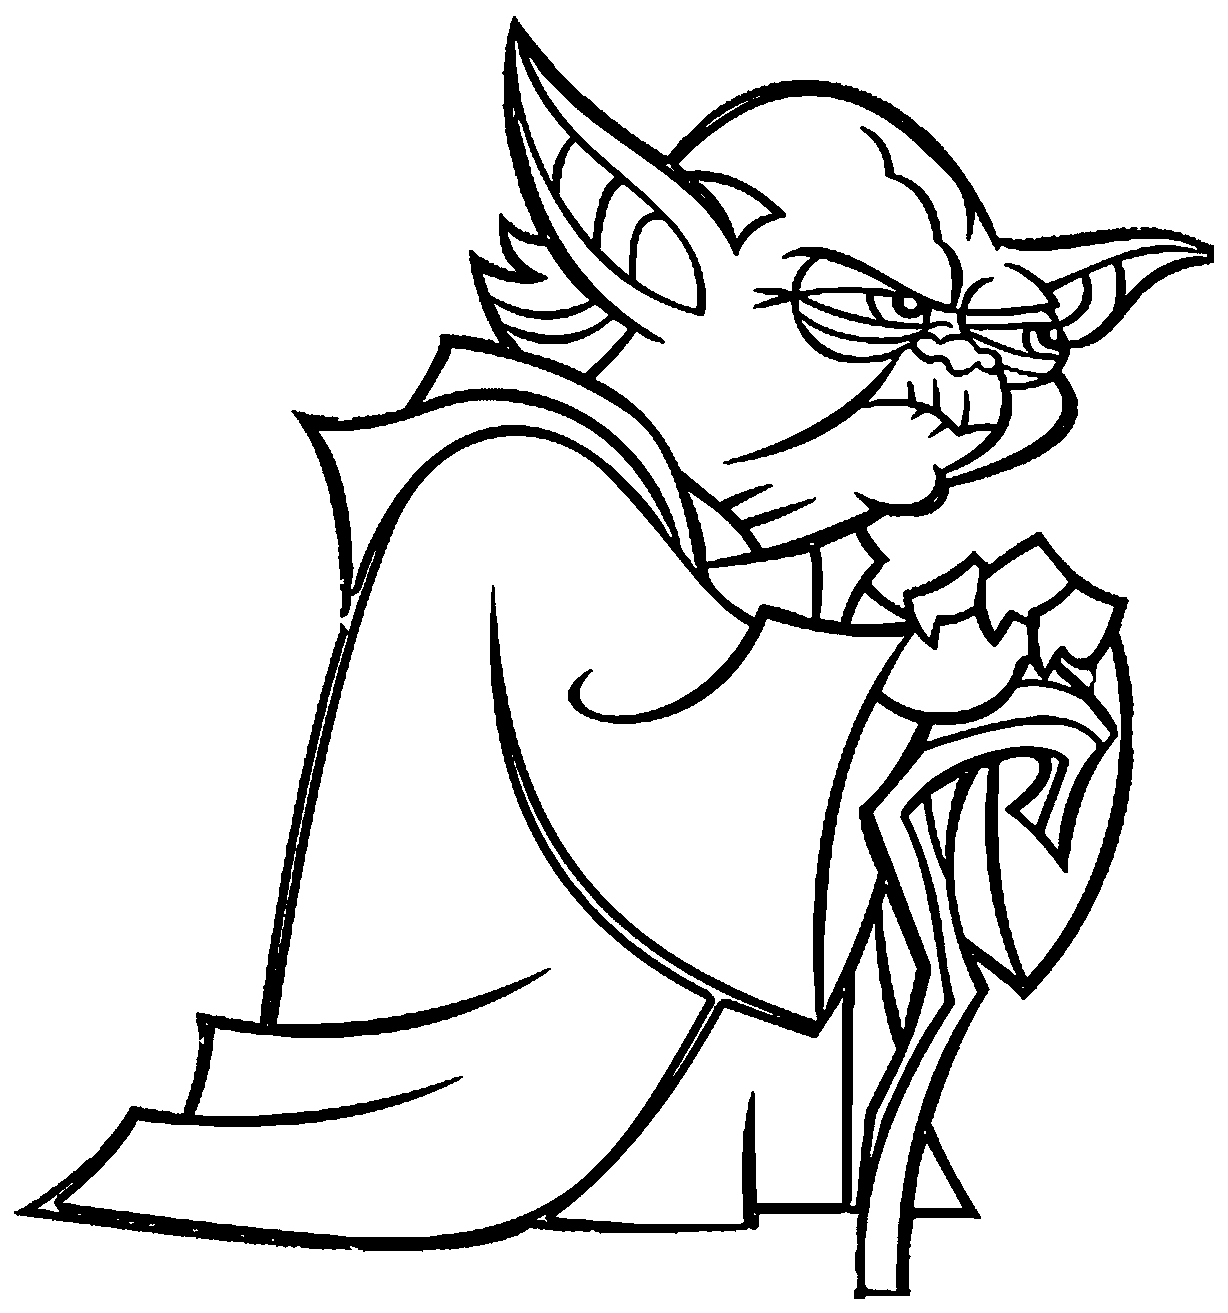 war coloring pages to print - photo #17